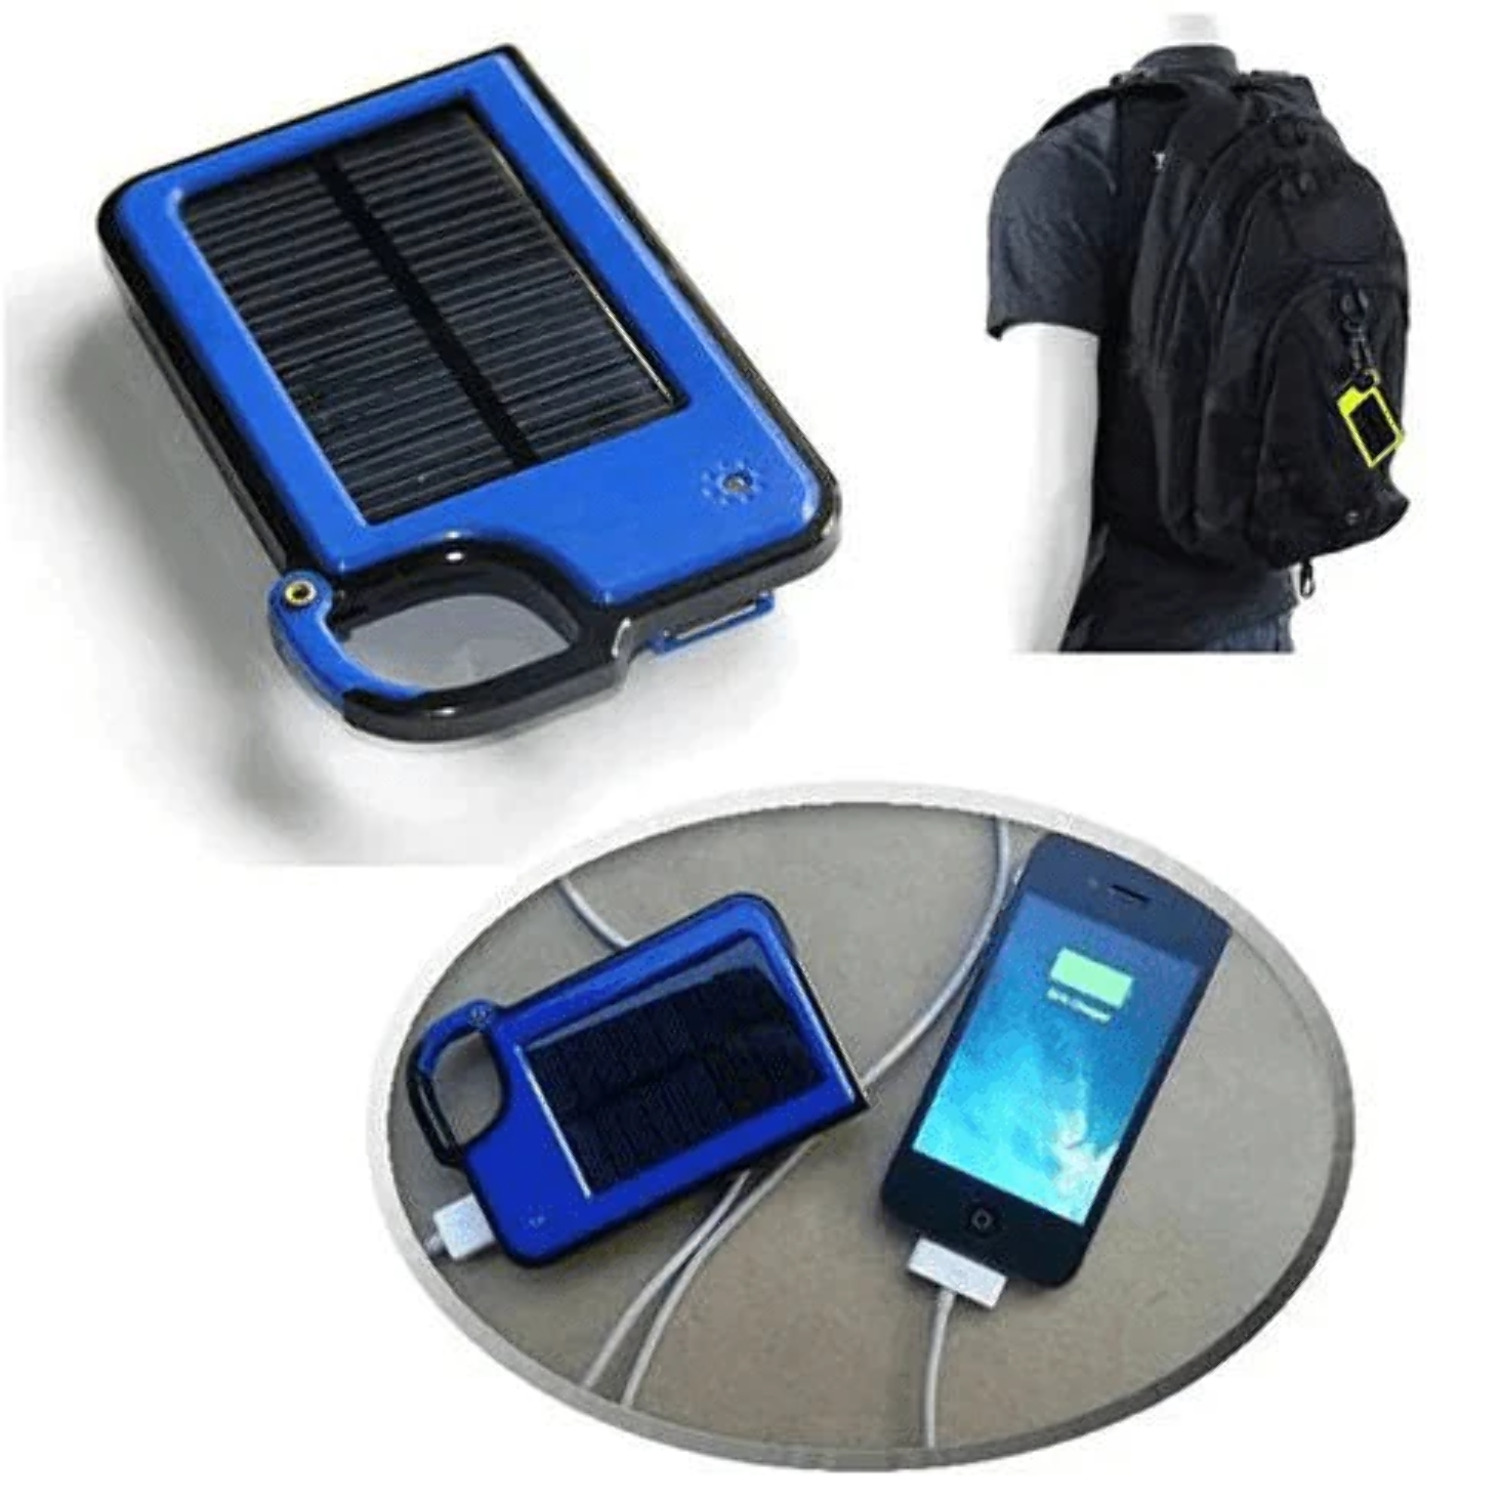 Clip-on Tag Along Solar Charger and 4050 mAh PowerBank For Your Smartphone - image 2 of 6